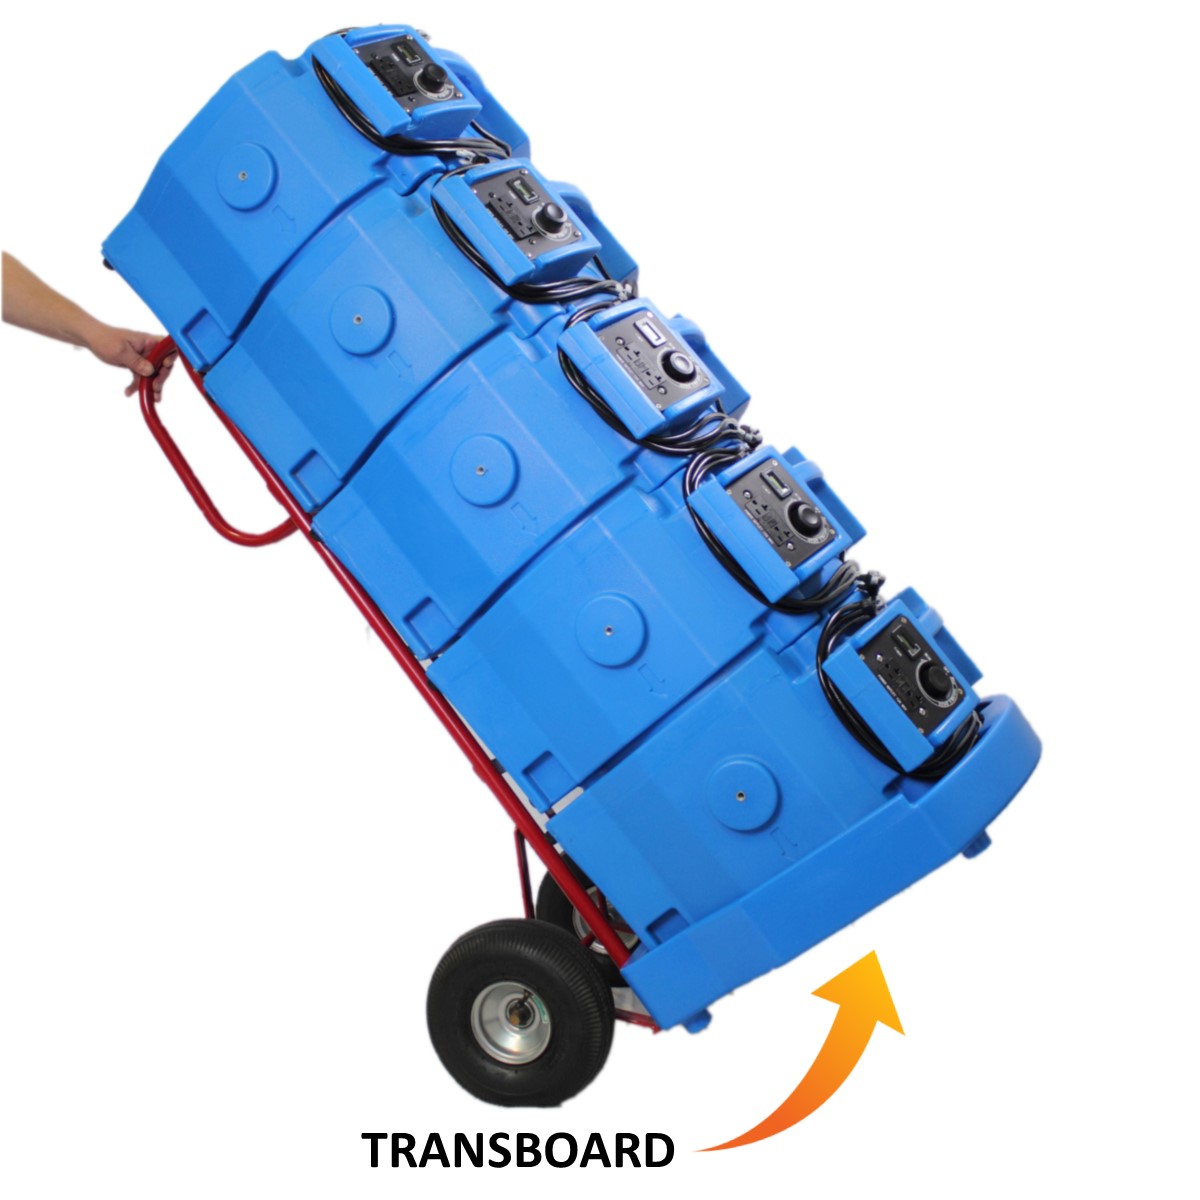 Tranport fans and heaters using the transboard